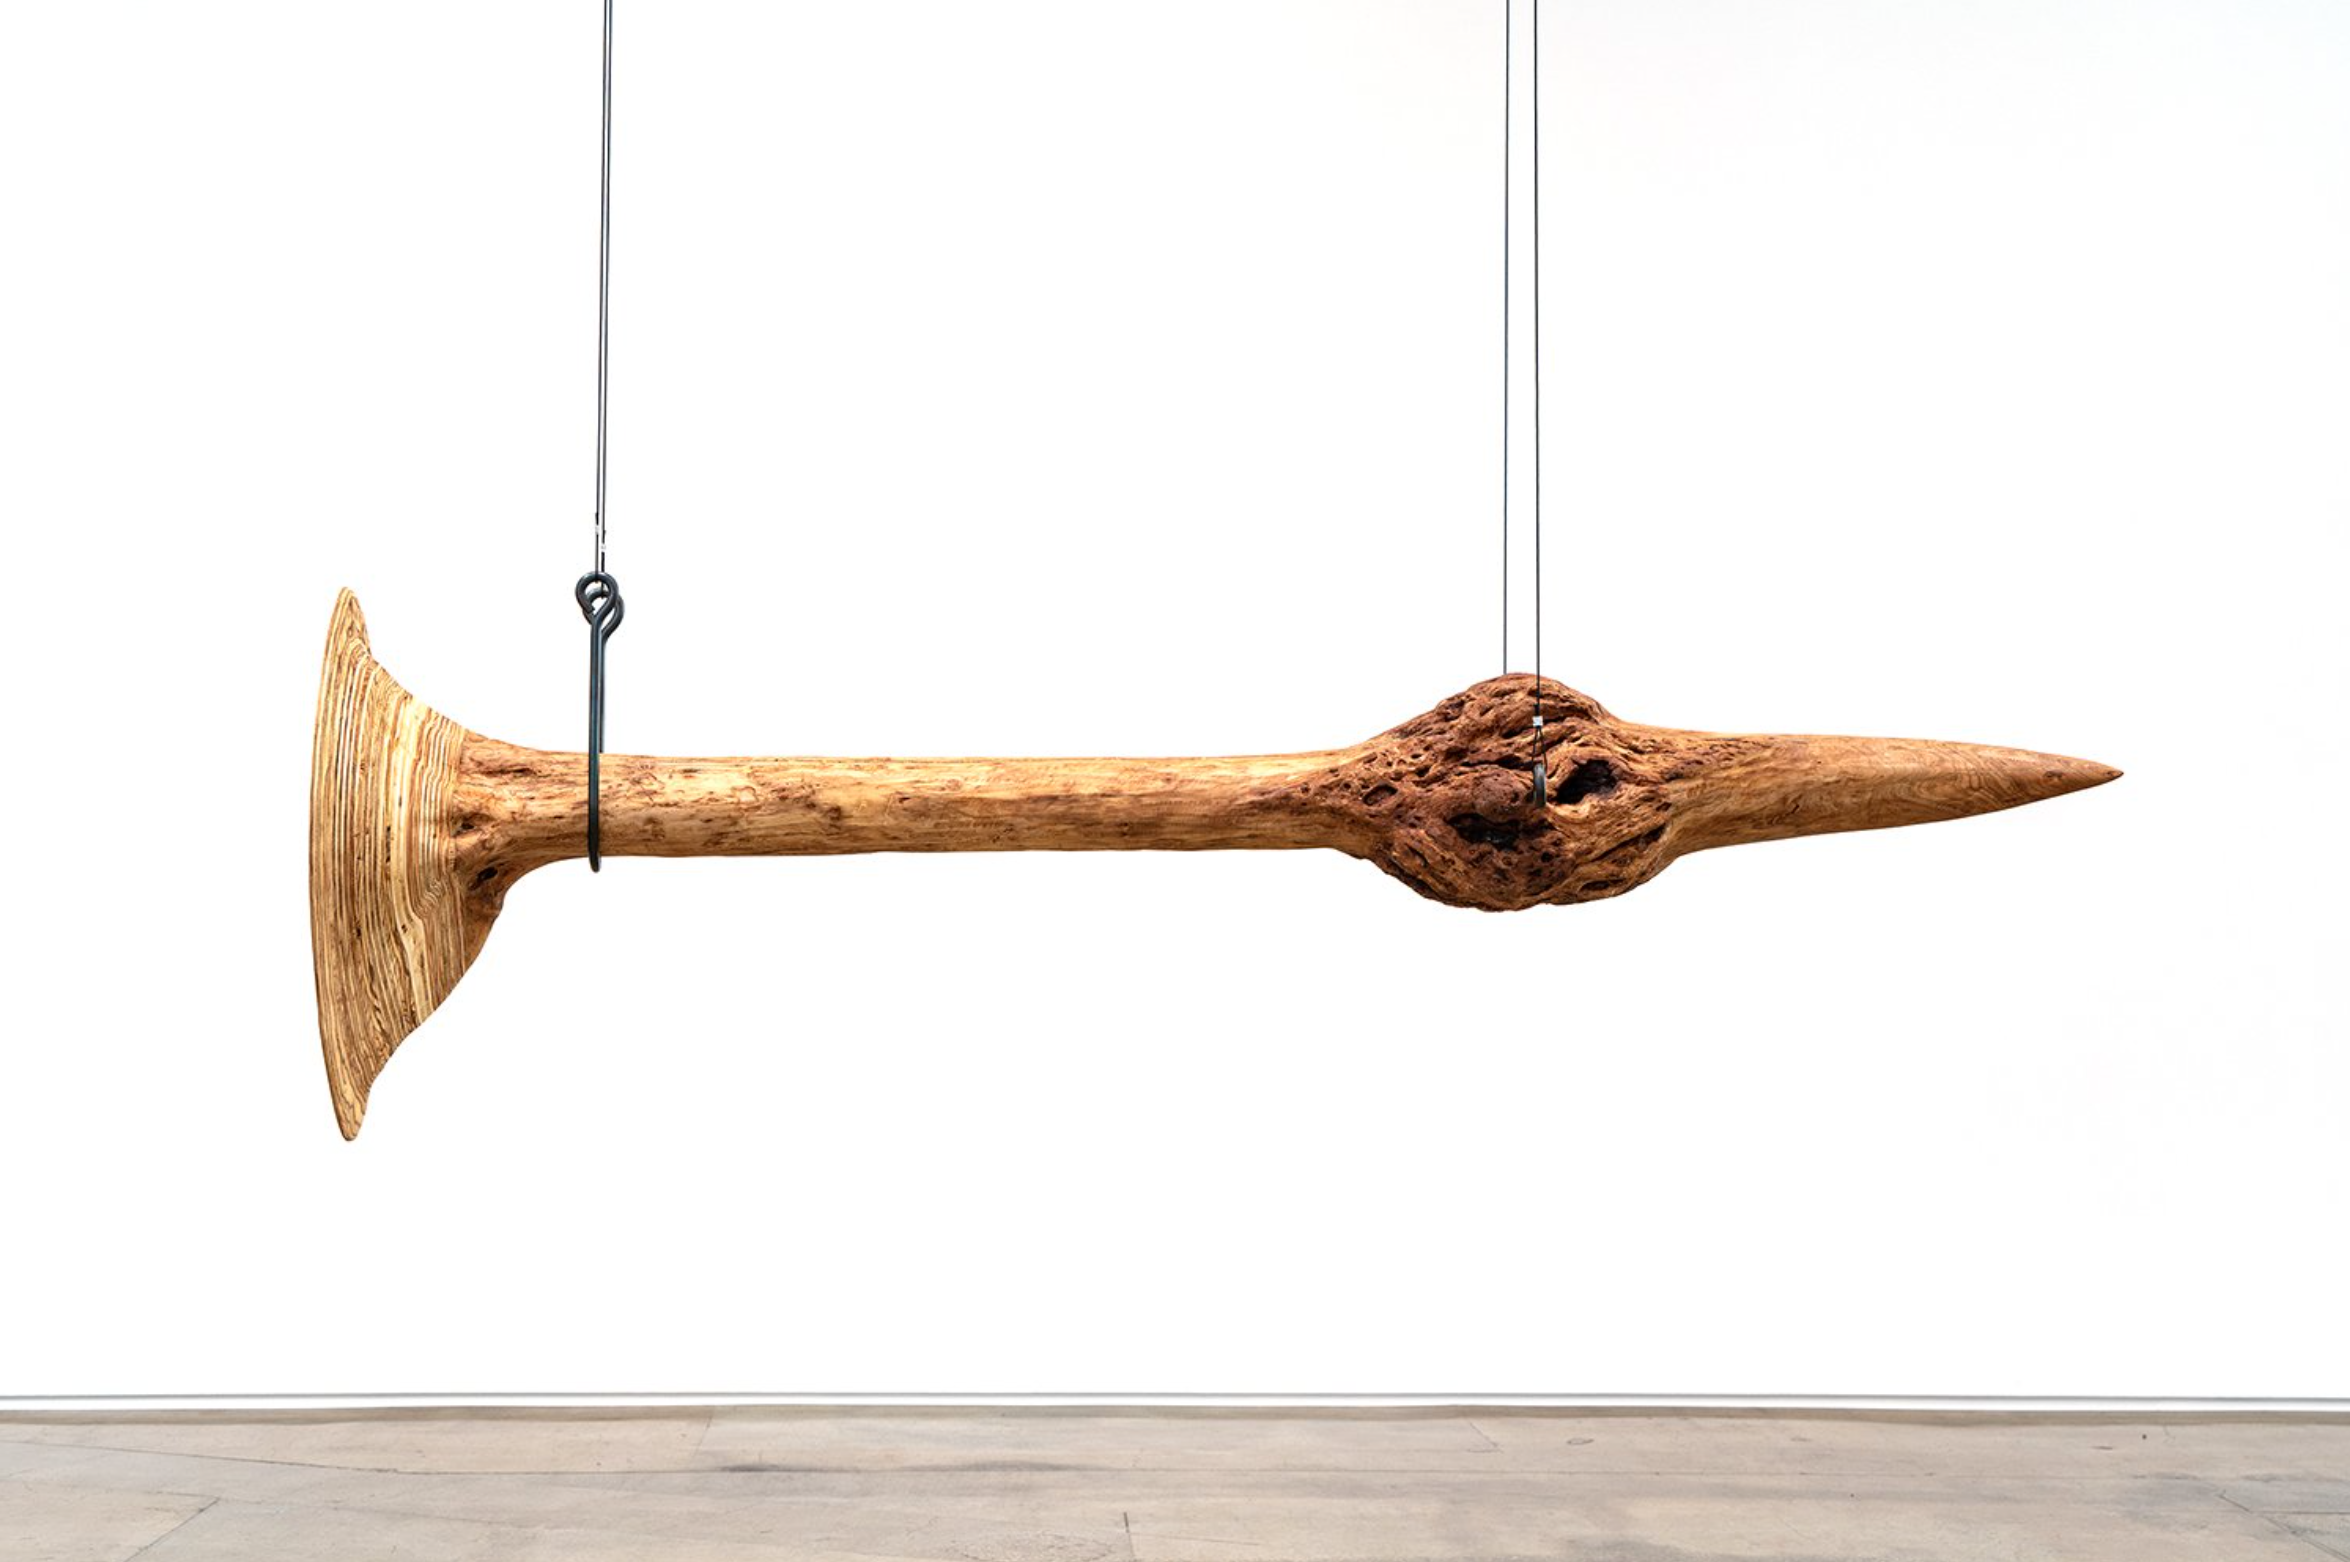   Alicia Adamerovich, "Blaring in a vacuum," 2022, maple tree, plywood, forged steel rods and aircraft cable, 26 1/2 x 85 3/4 x 25 1/4 inches  